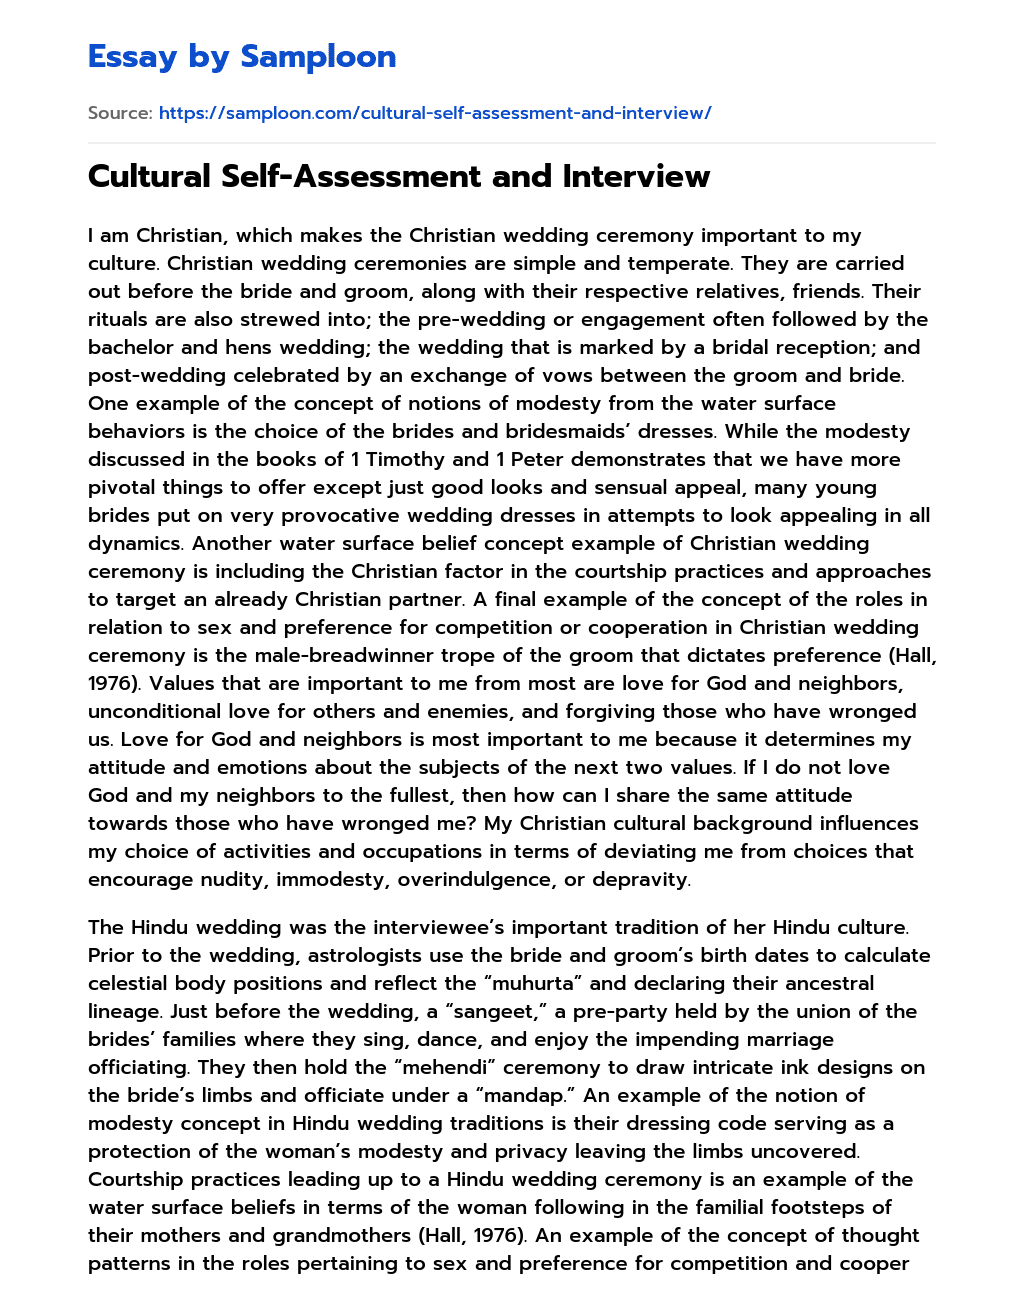 Cultural Self-Assessment and Interview essay